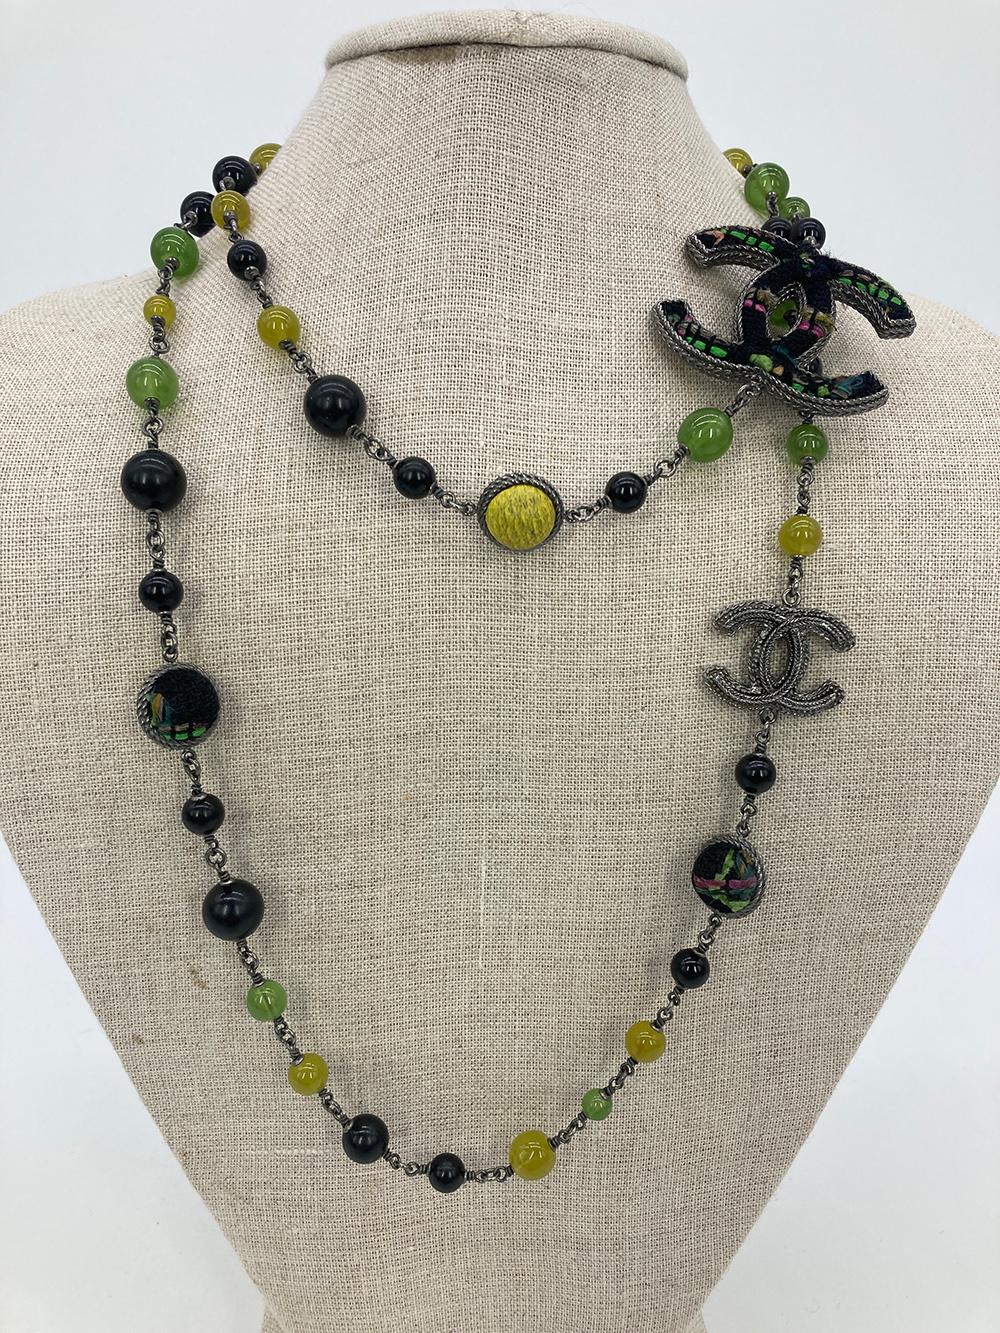 Chanel Black and Green Silver Tweed Beaded CC Logo Necklace- RARE in excellent condition. Black, green and yellow glass beads in various sizes strung together with silver chain and trimmed with tweed beads and CC logos. Largest CC logo features